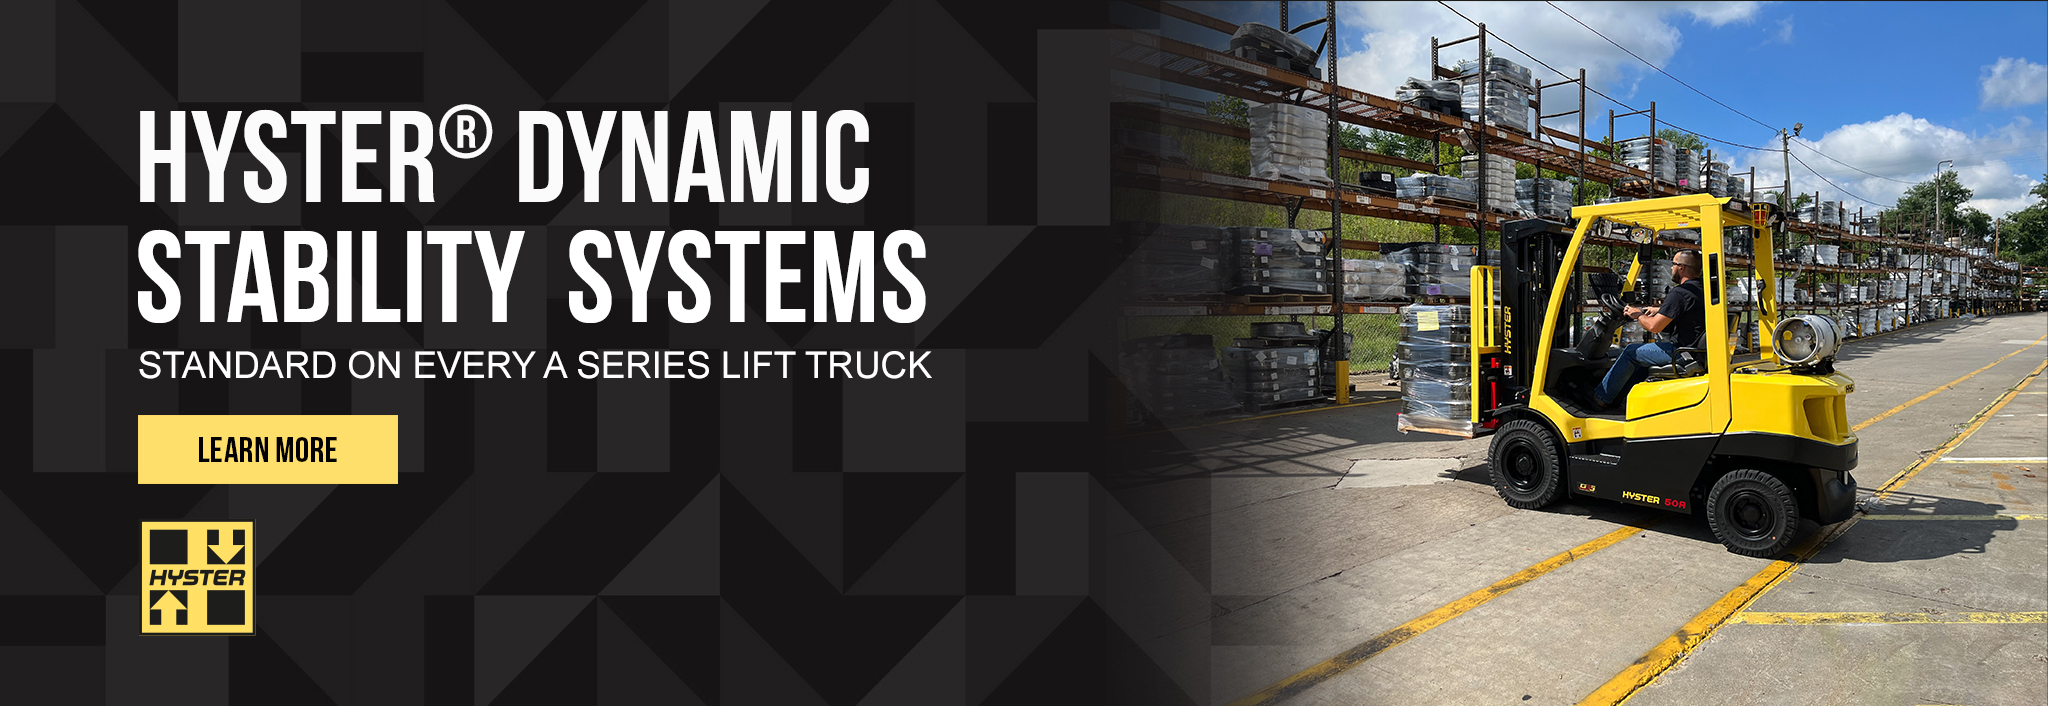 Hyster Dynamic Stability System Promo Banner